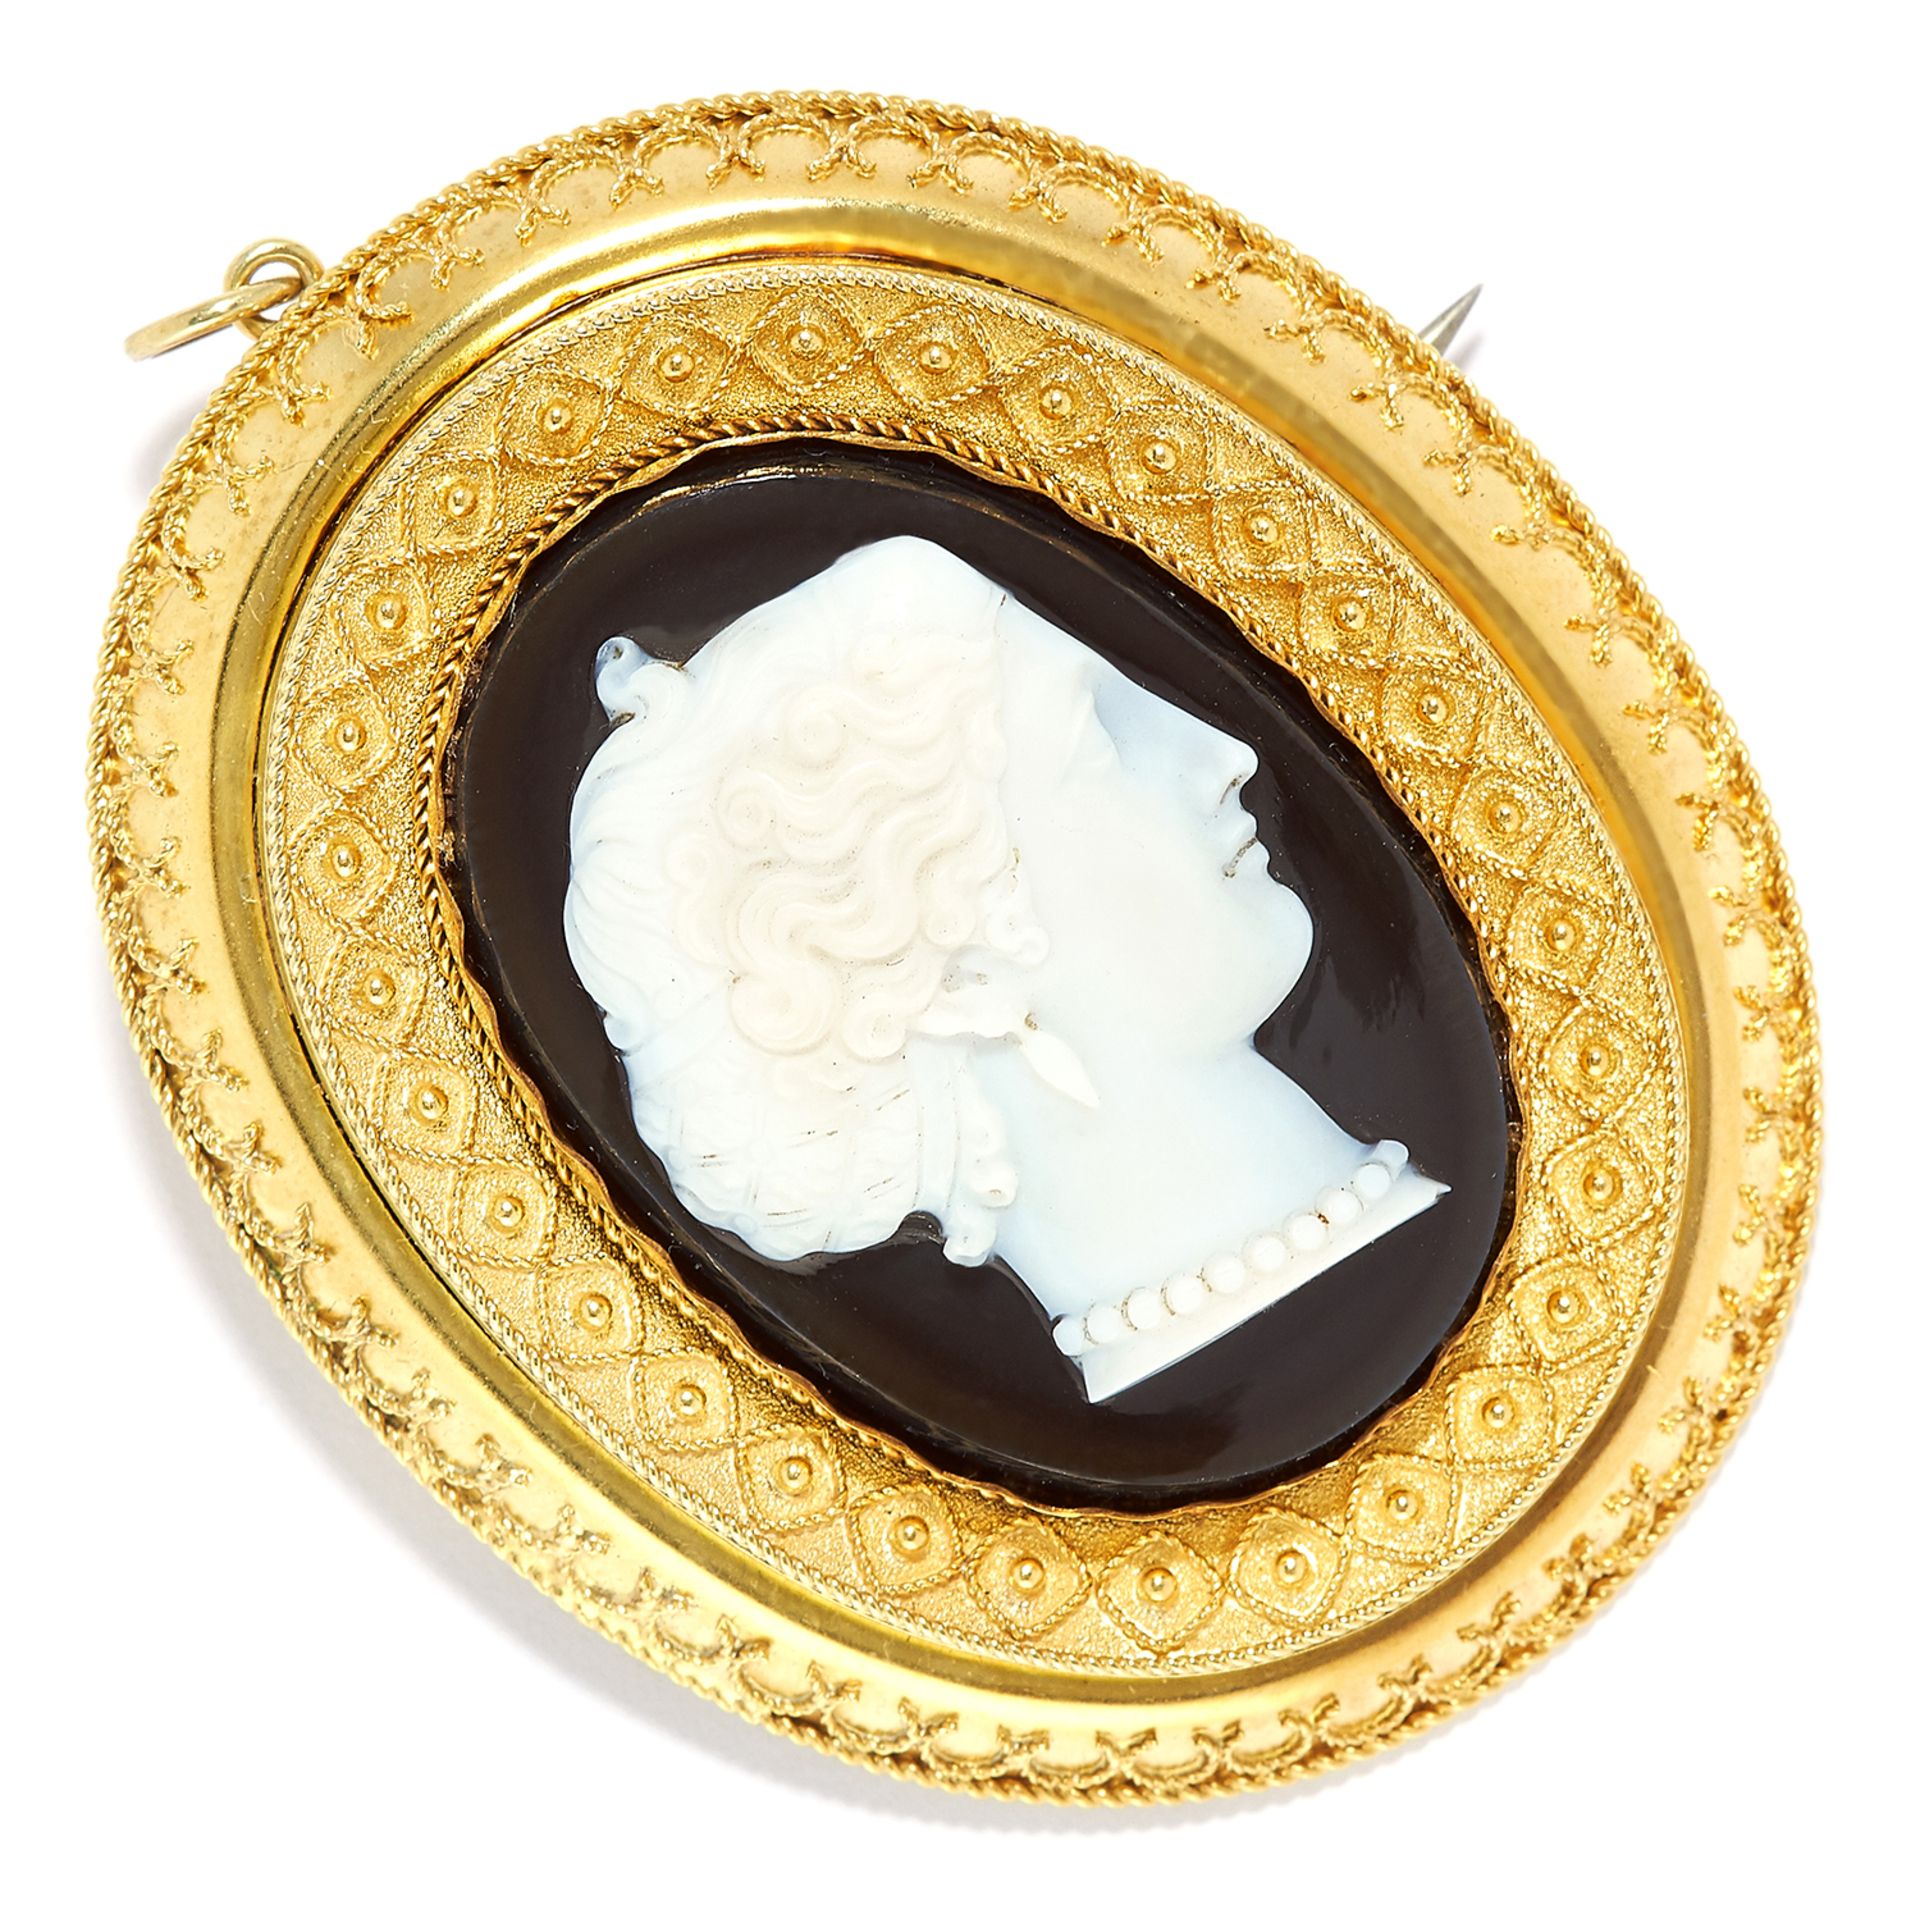 ANTIQUE CARVED CAMEO BROOCH / PENDANT in high carat yellow gold, comprising of a carved cameo